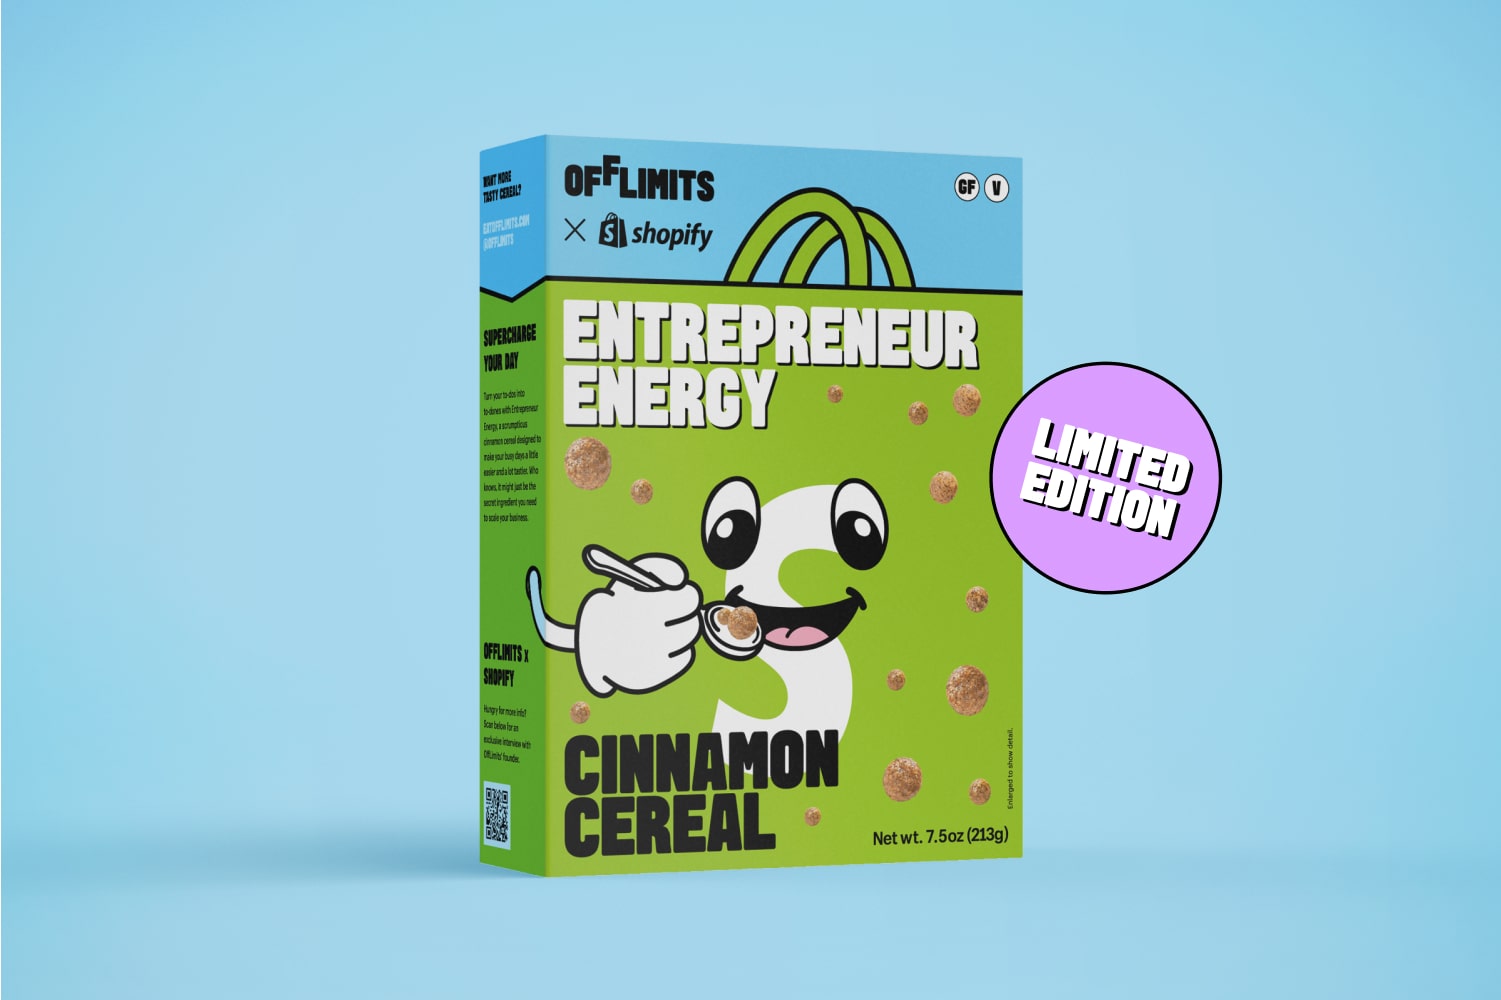 A box of Entrepreneur Energy cinnamon cereal on a blue background